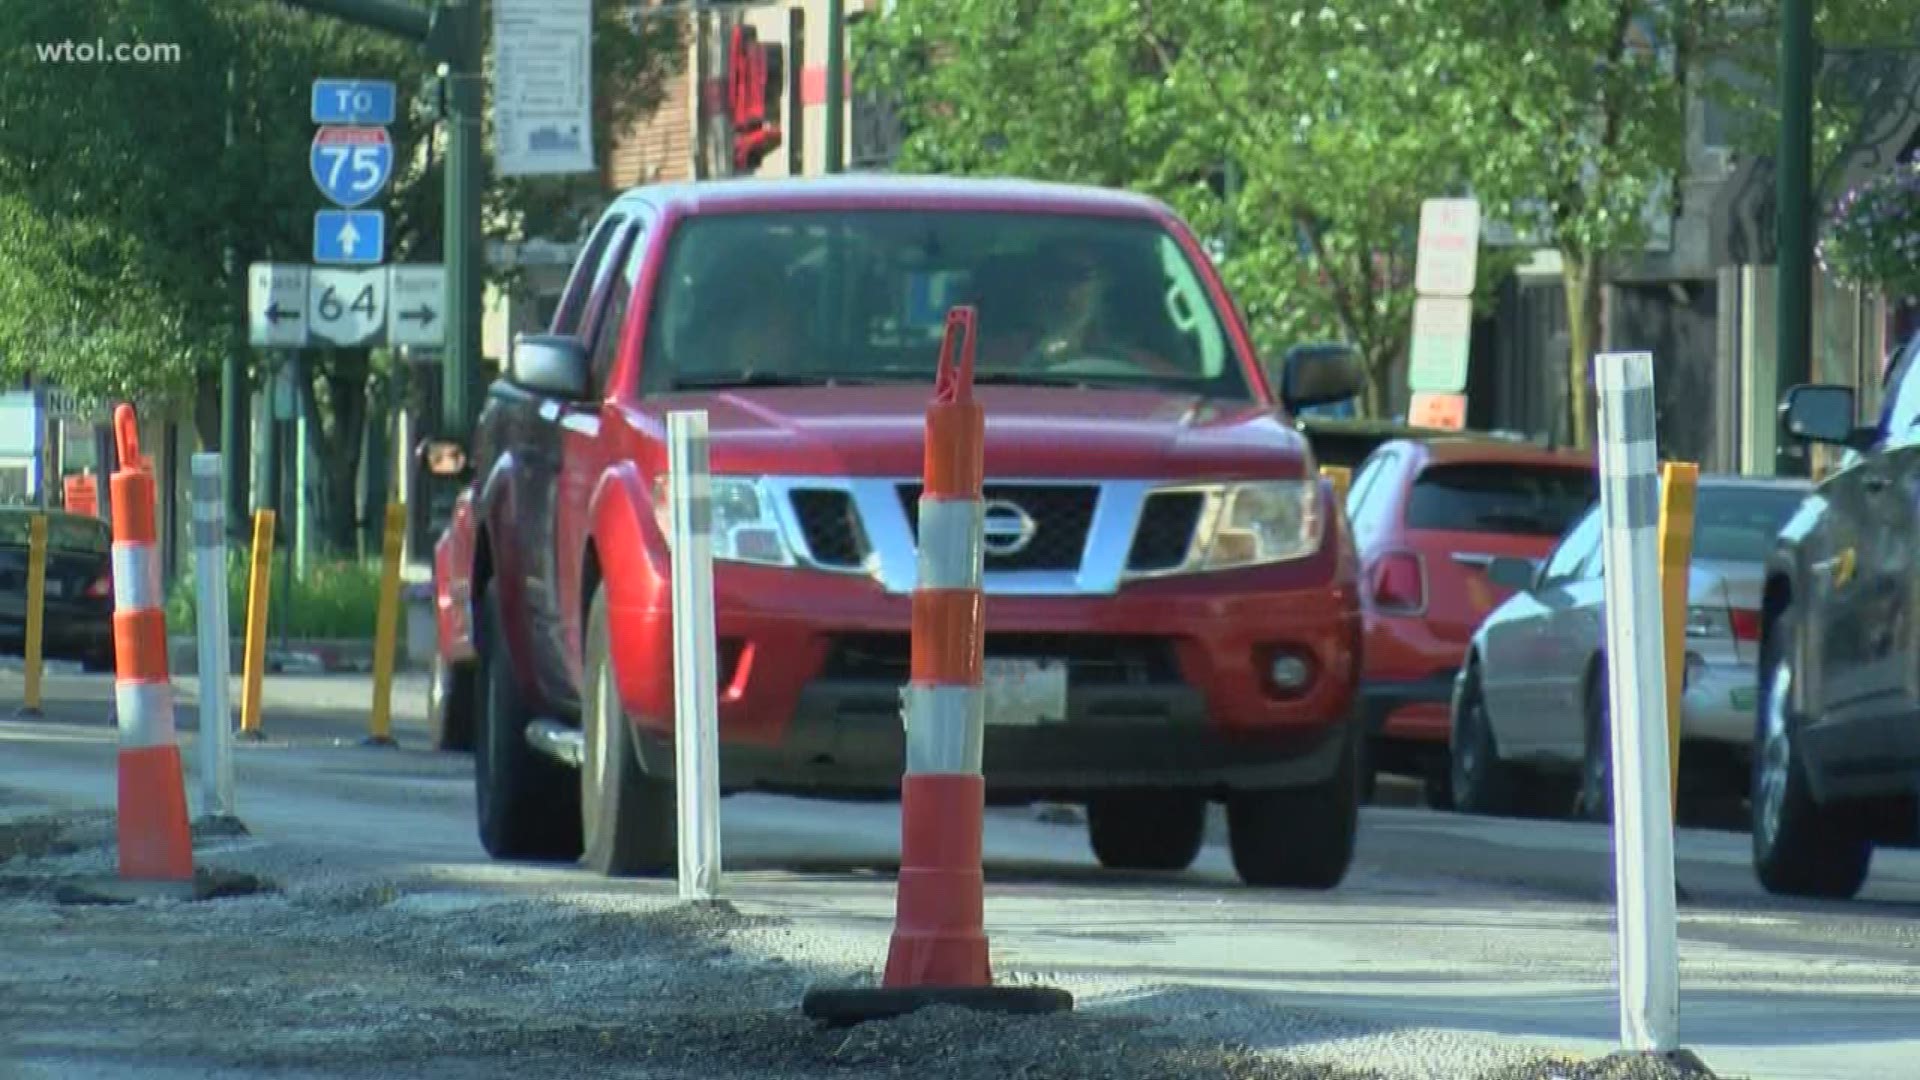 As work continues on the roads and several utility lines in downtown Bowling Green, the festival will have to relocate due to safety concerns.